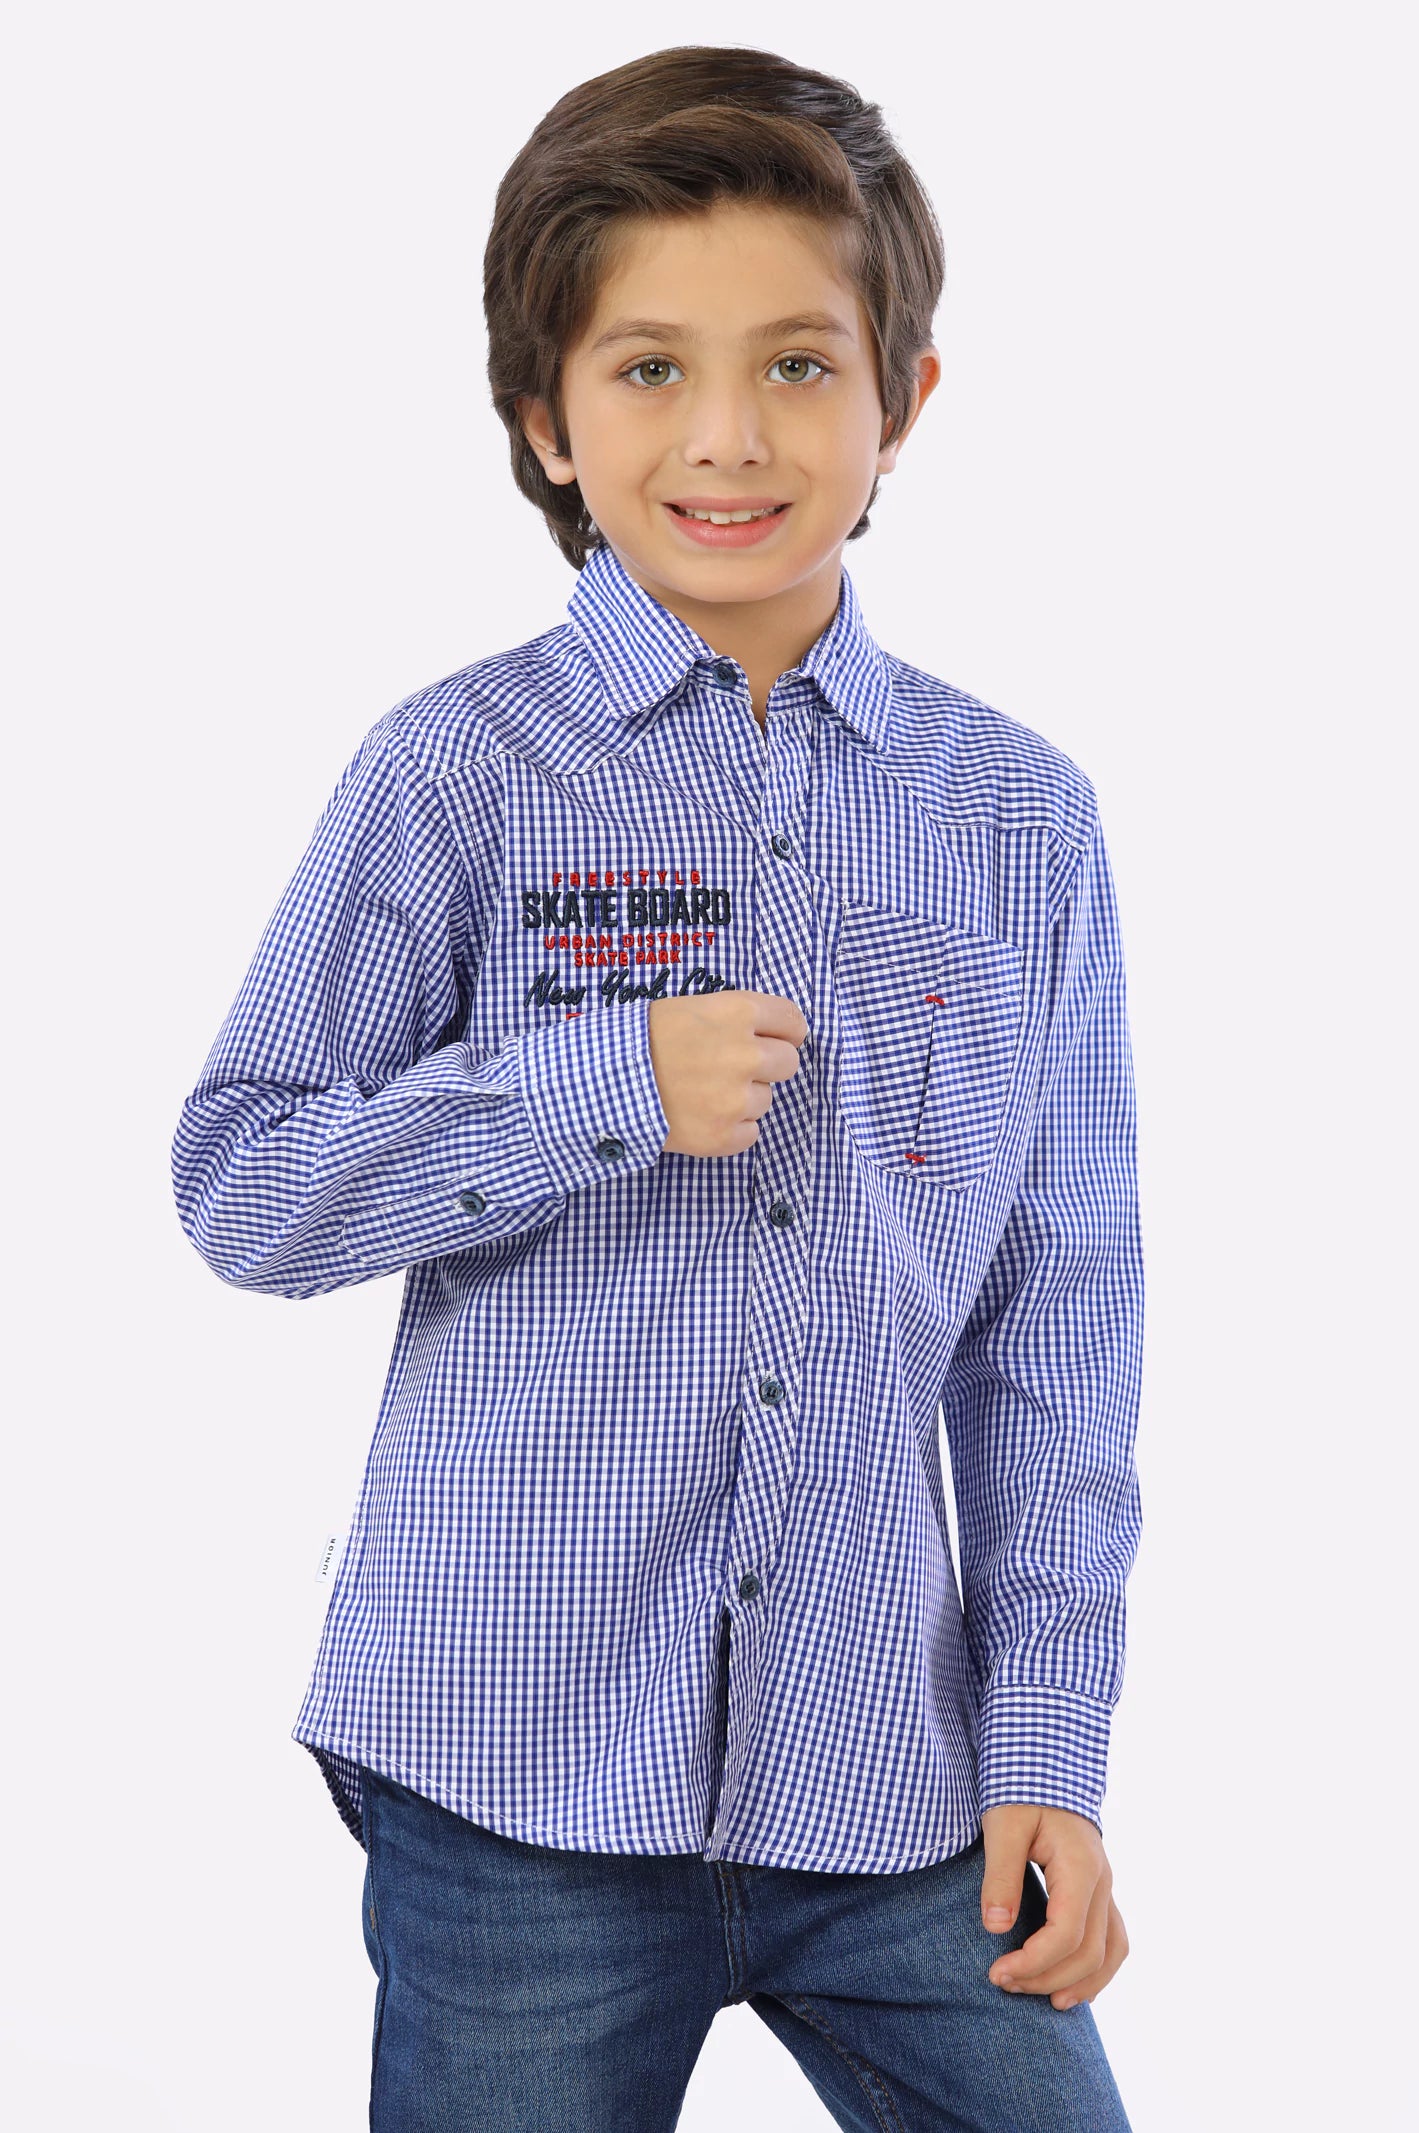 Royal Blue Mini-Check Boys Shirt From Diners